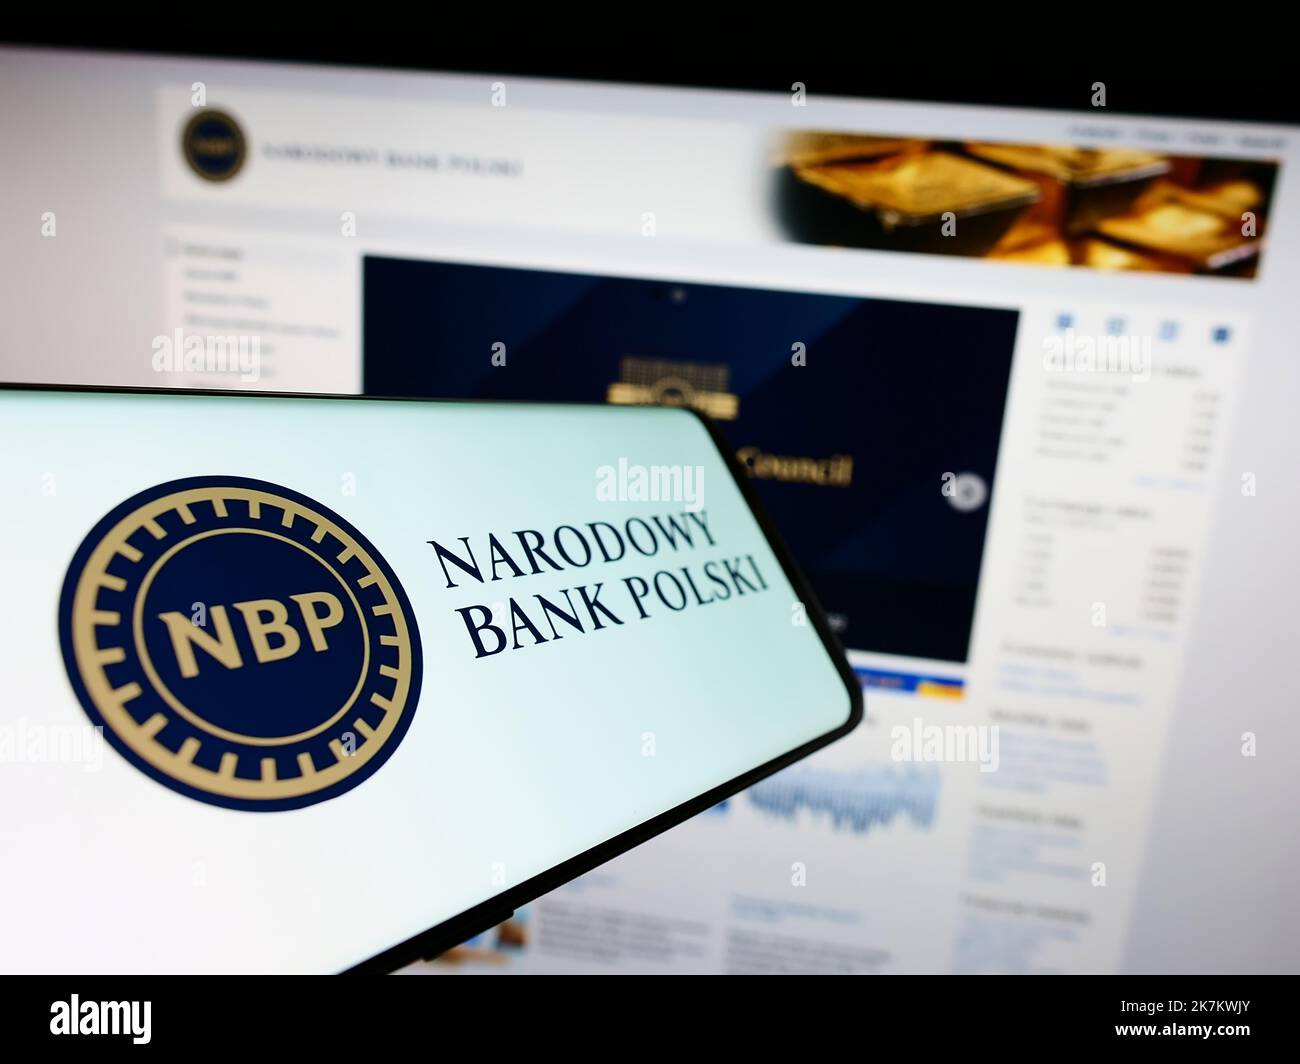 Smartphone with logo of Polish central bank Narodowy Bank Polski (NBP) on screen in front of website. Focus on center of phone display. Stock Photo